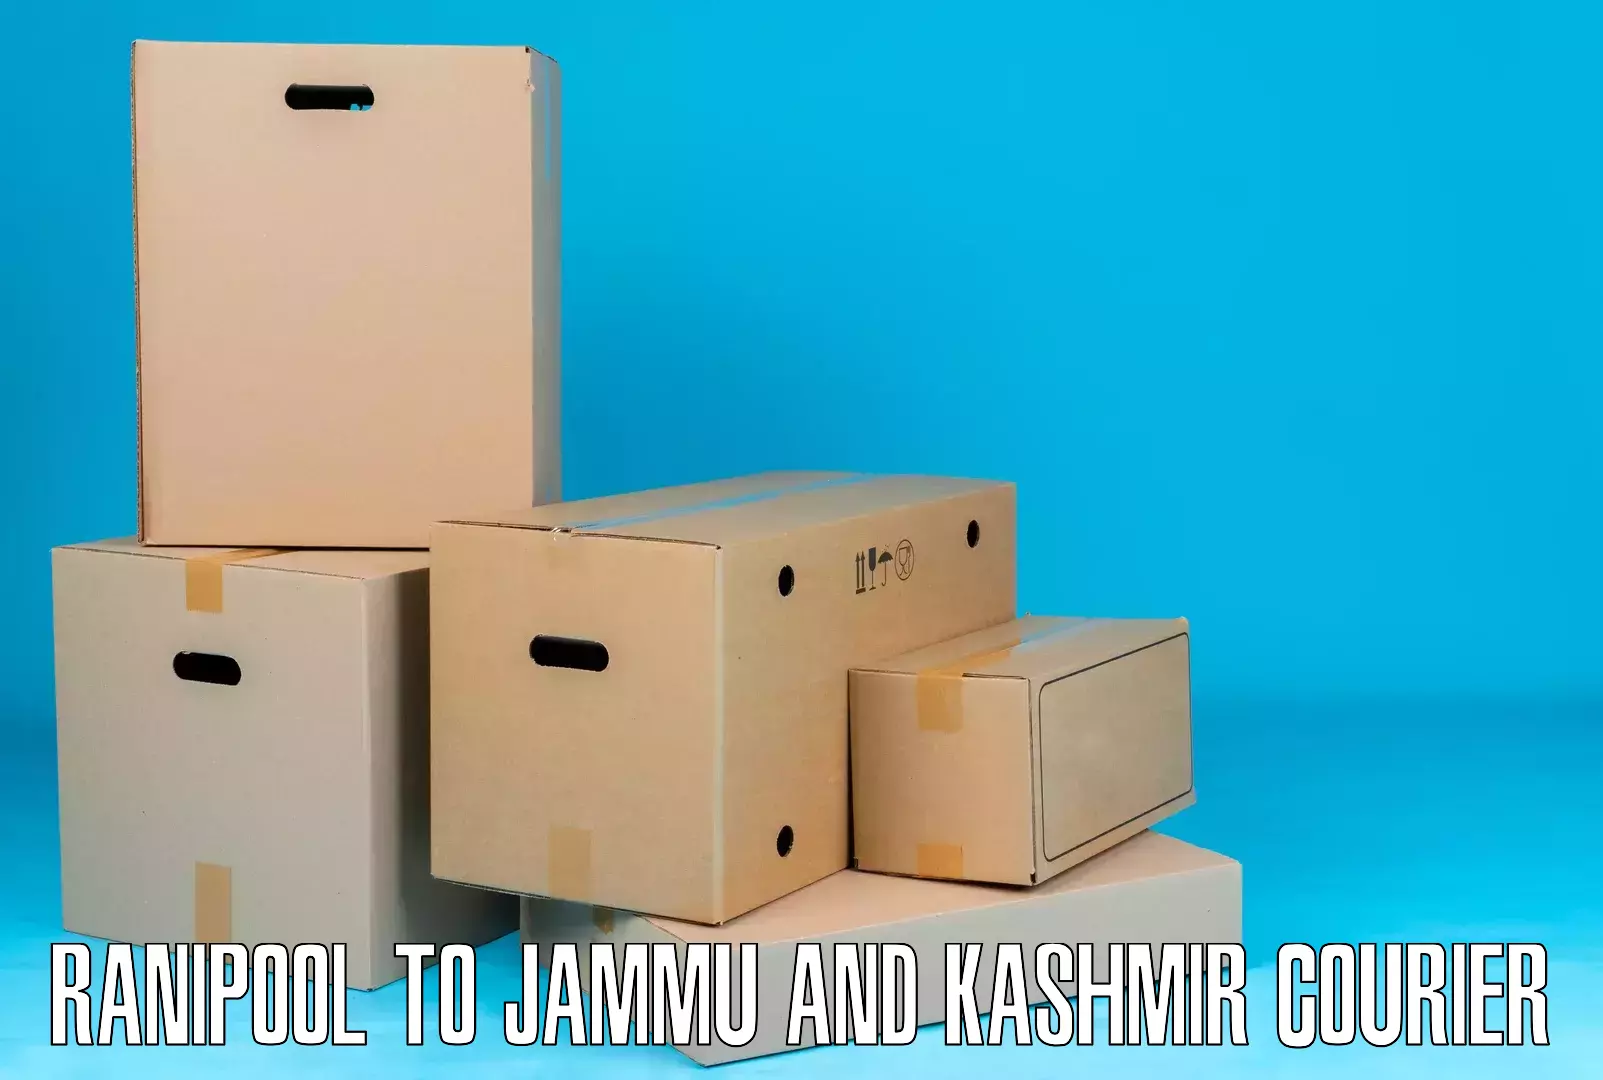 Large package courier Ranipool to Jammu